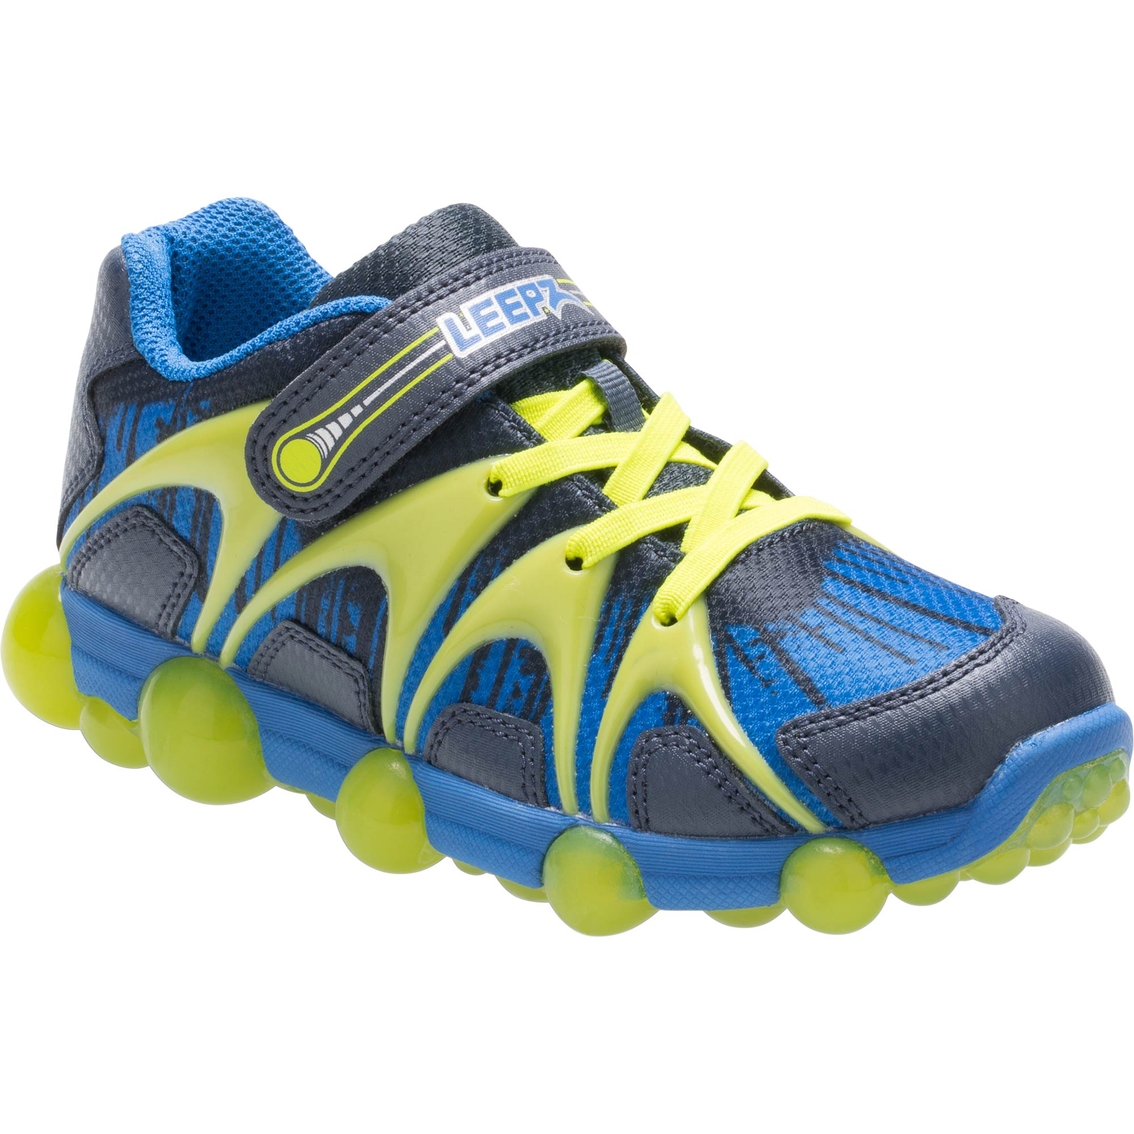 Stride Rite Boys Leepz Lighted Sneakers Casual Shoes